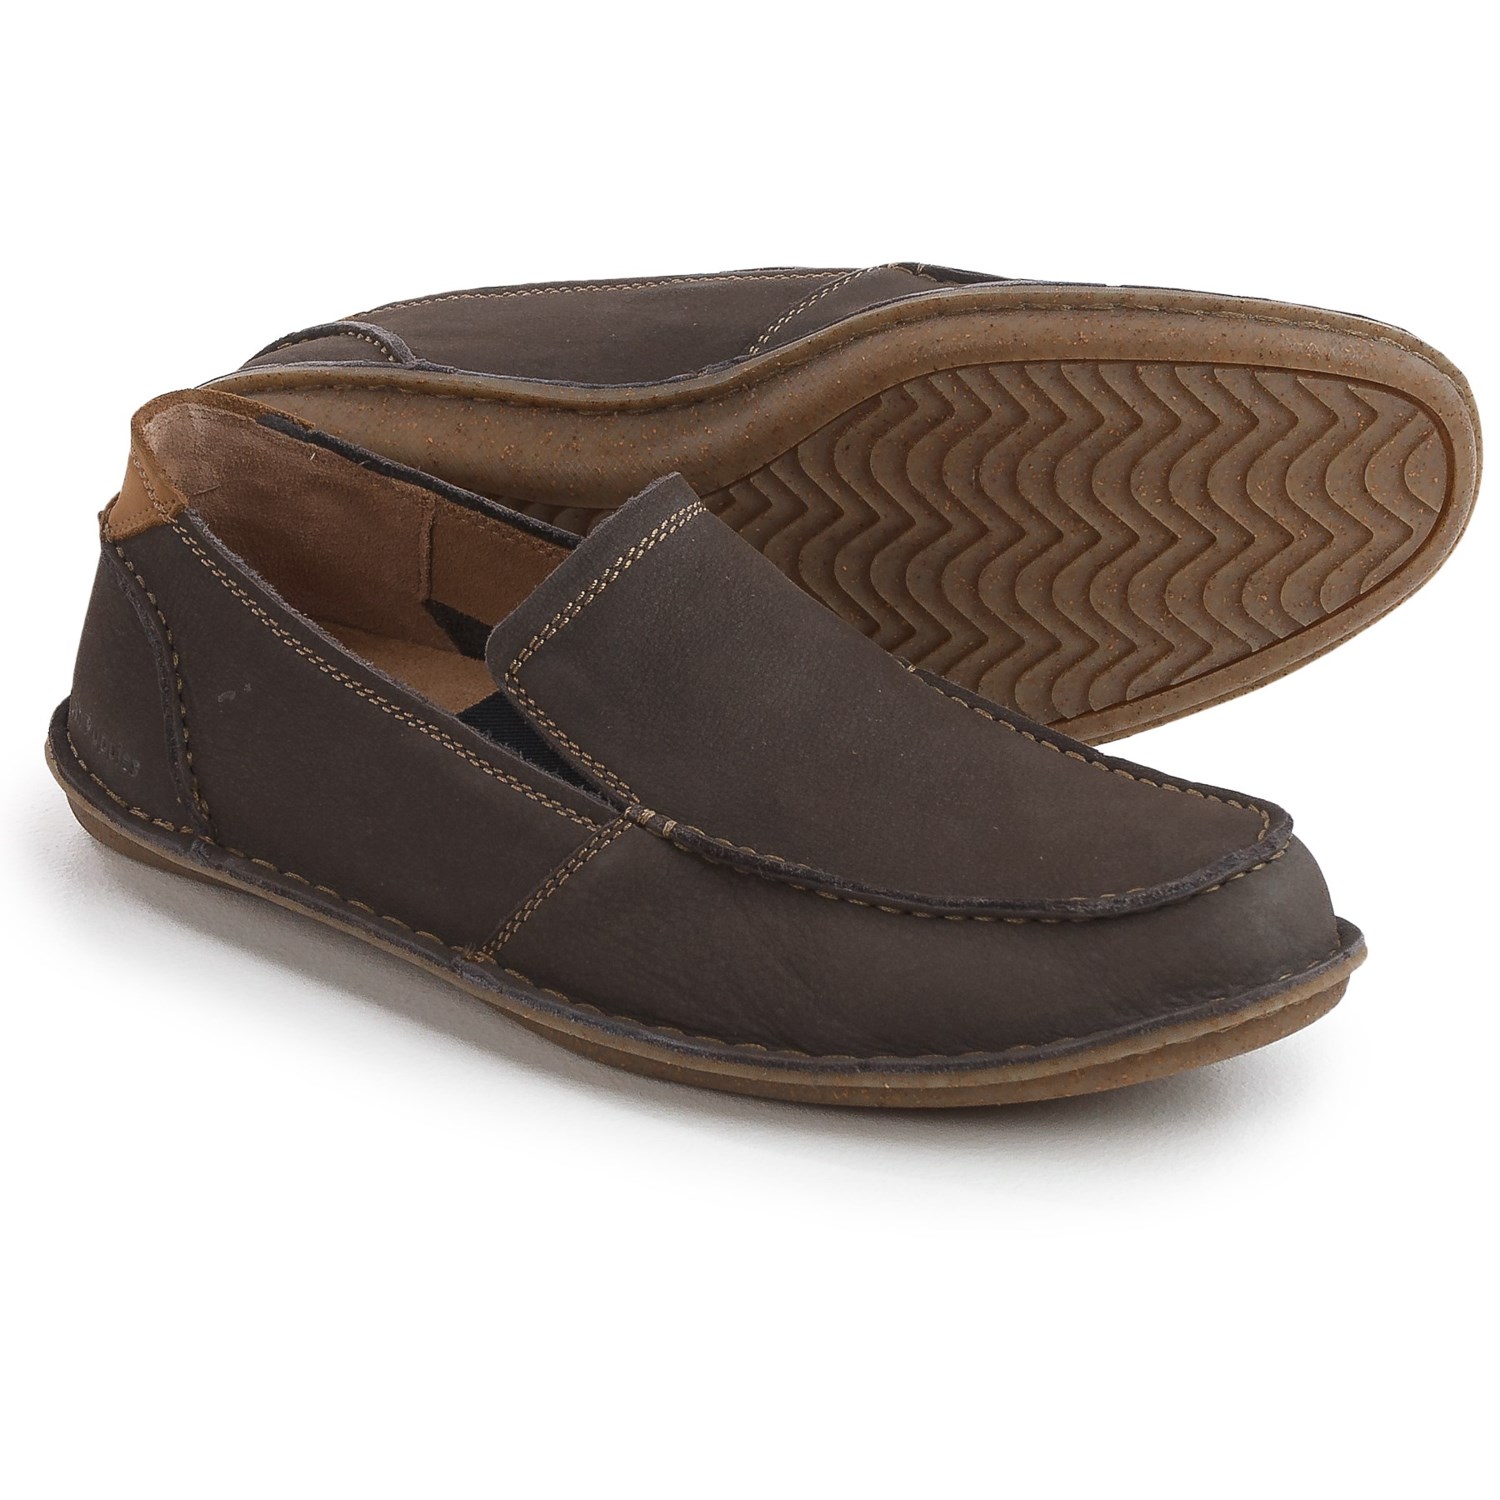 Hush Puppies Asil Roll Flex Loafers (For Men) - Save 54%